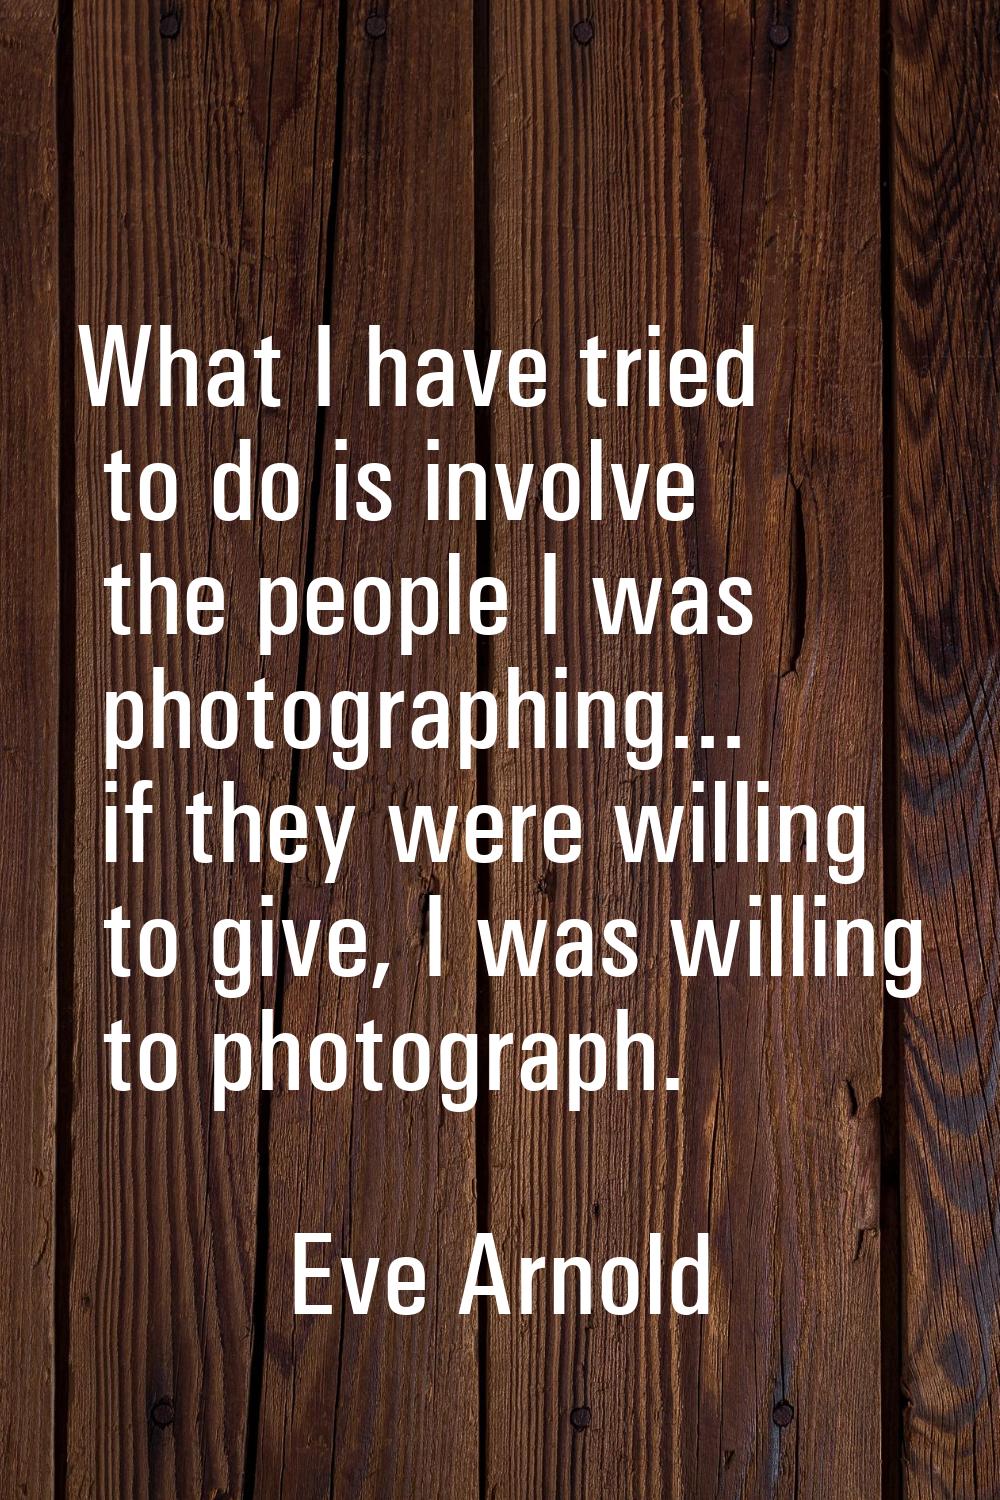 What I have tried to do is involve the people I was photographing... if they were willing to give, 